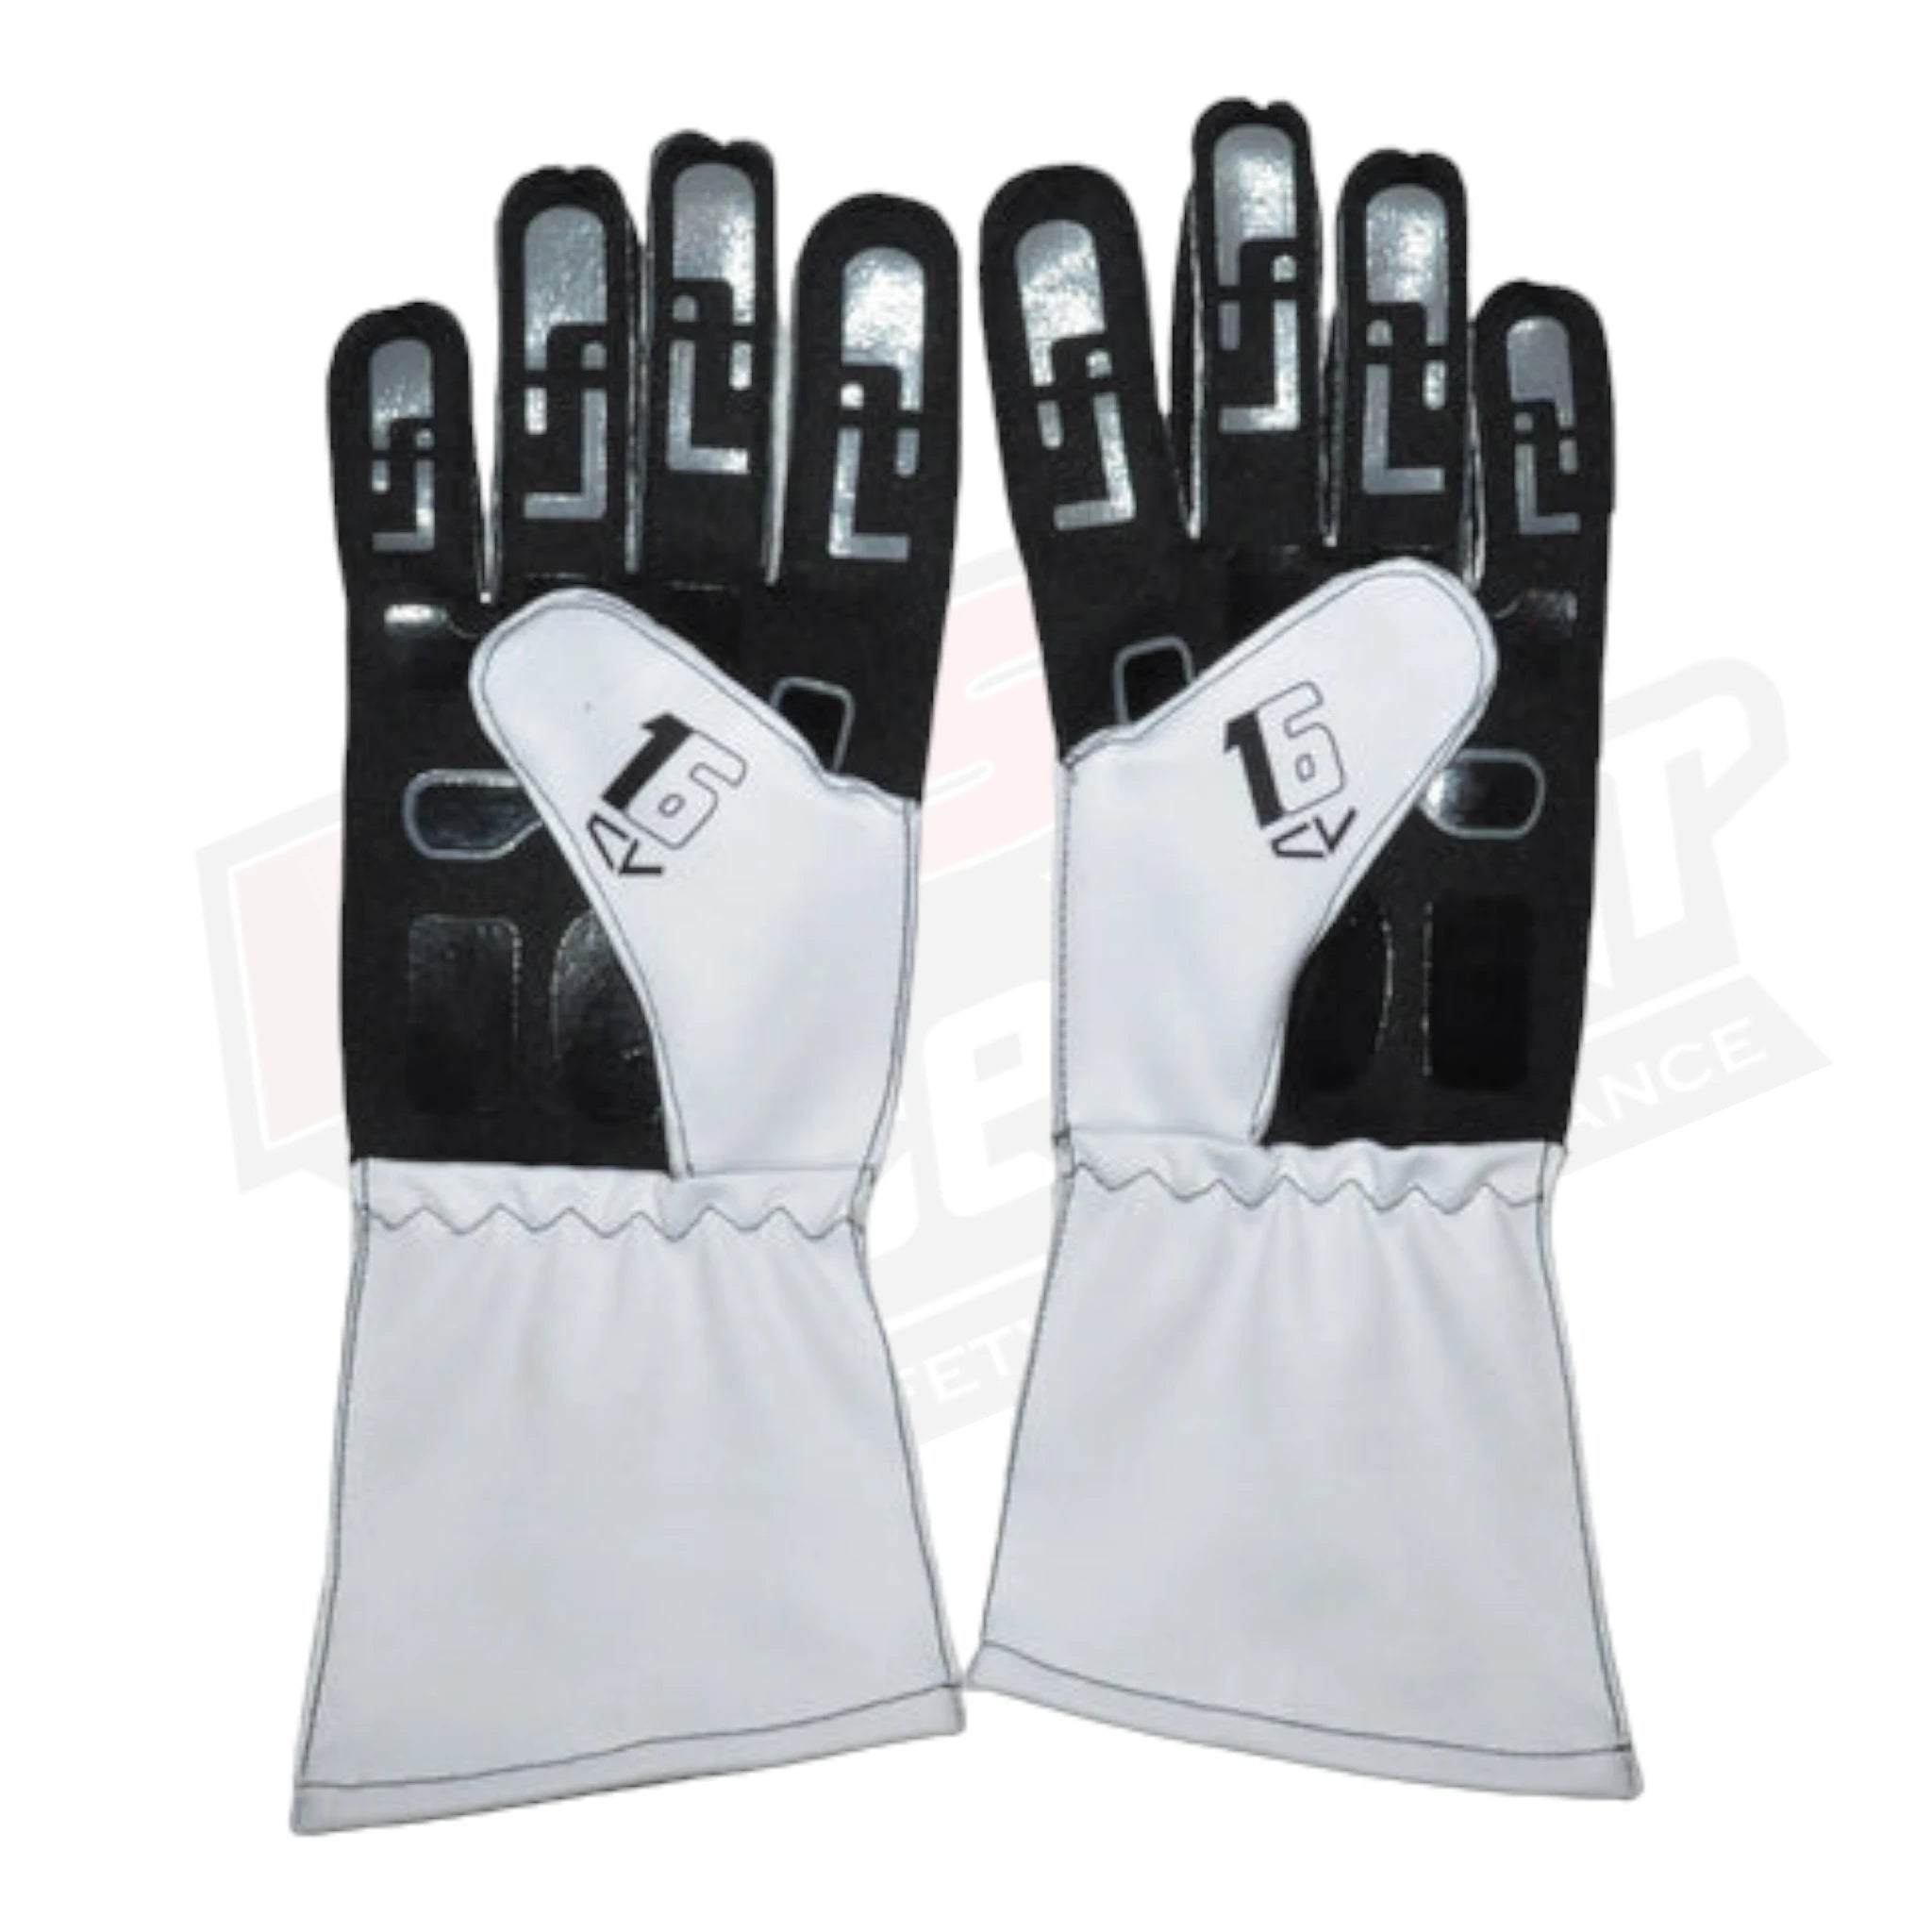 2018 Charles Leclerc Race Gloves